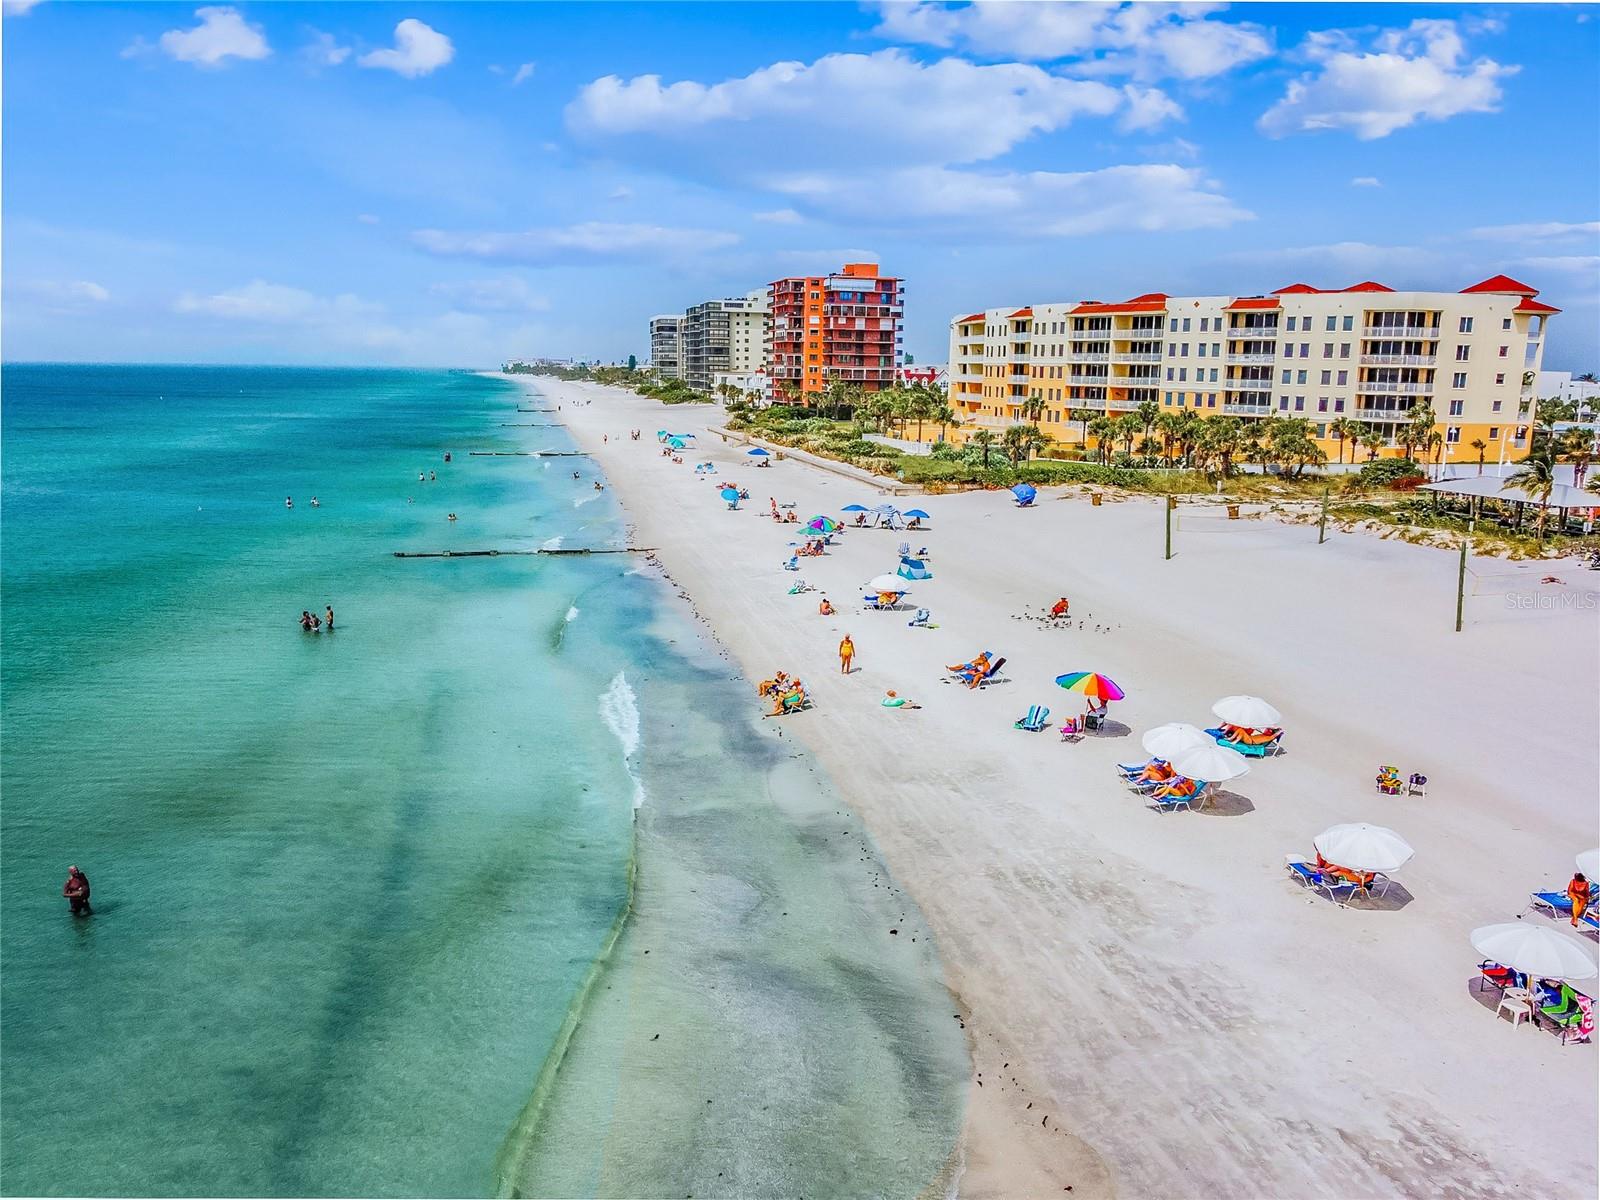 Indulge in the tranquil beauty of Madeira Beach's Gulf shore.